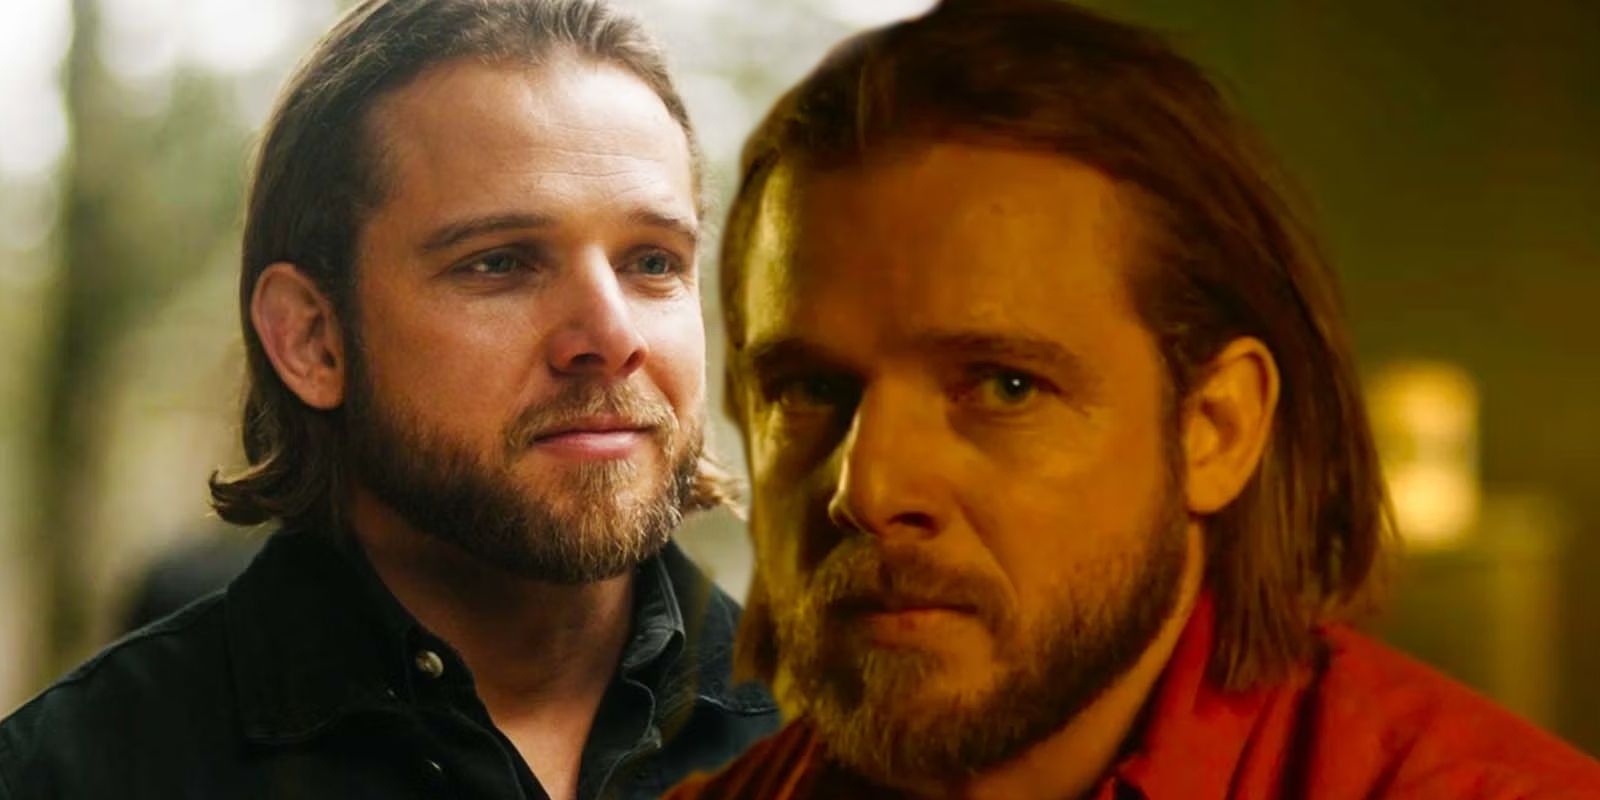 Max Thieriot as Bode Leon smiling next to Bode looking stressed in Fire Country season 2